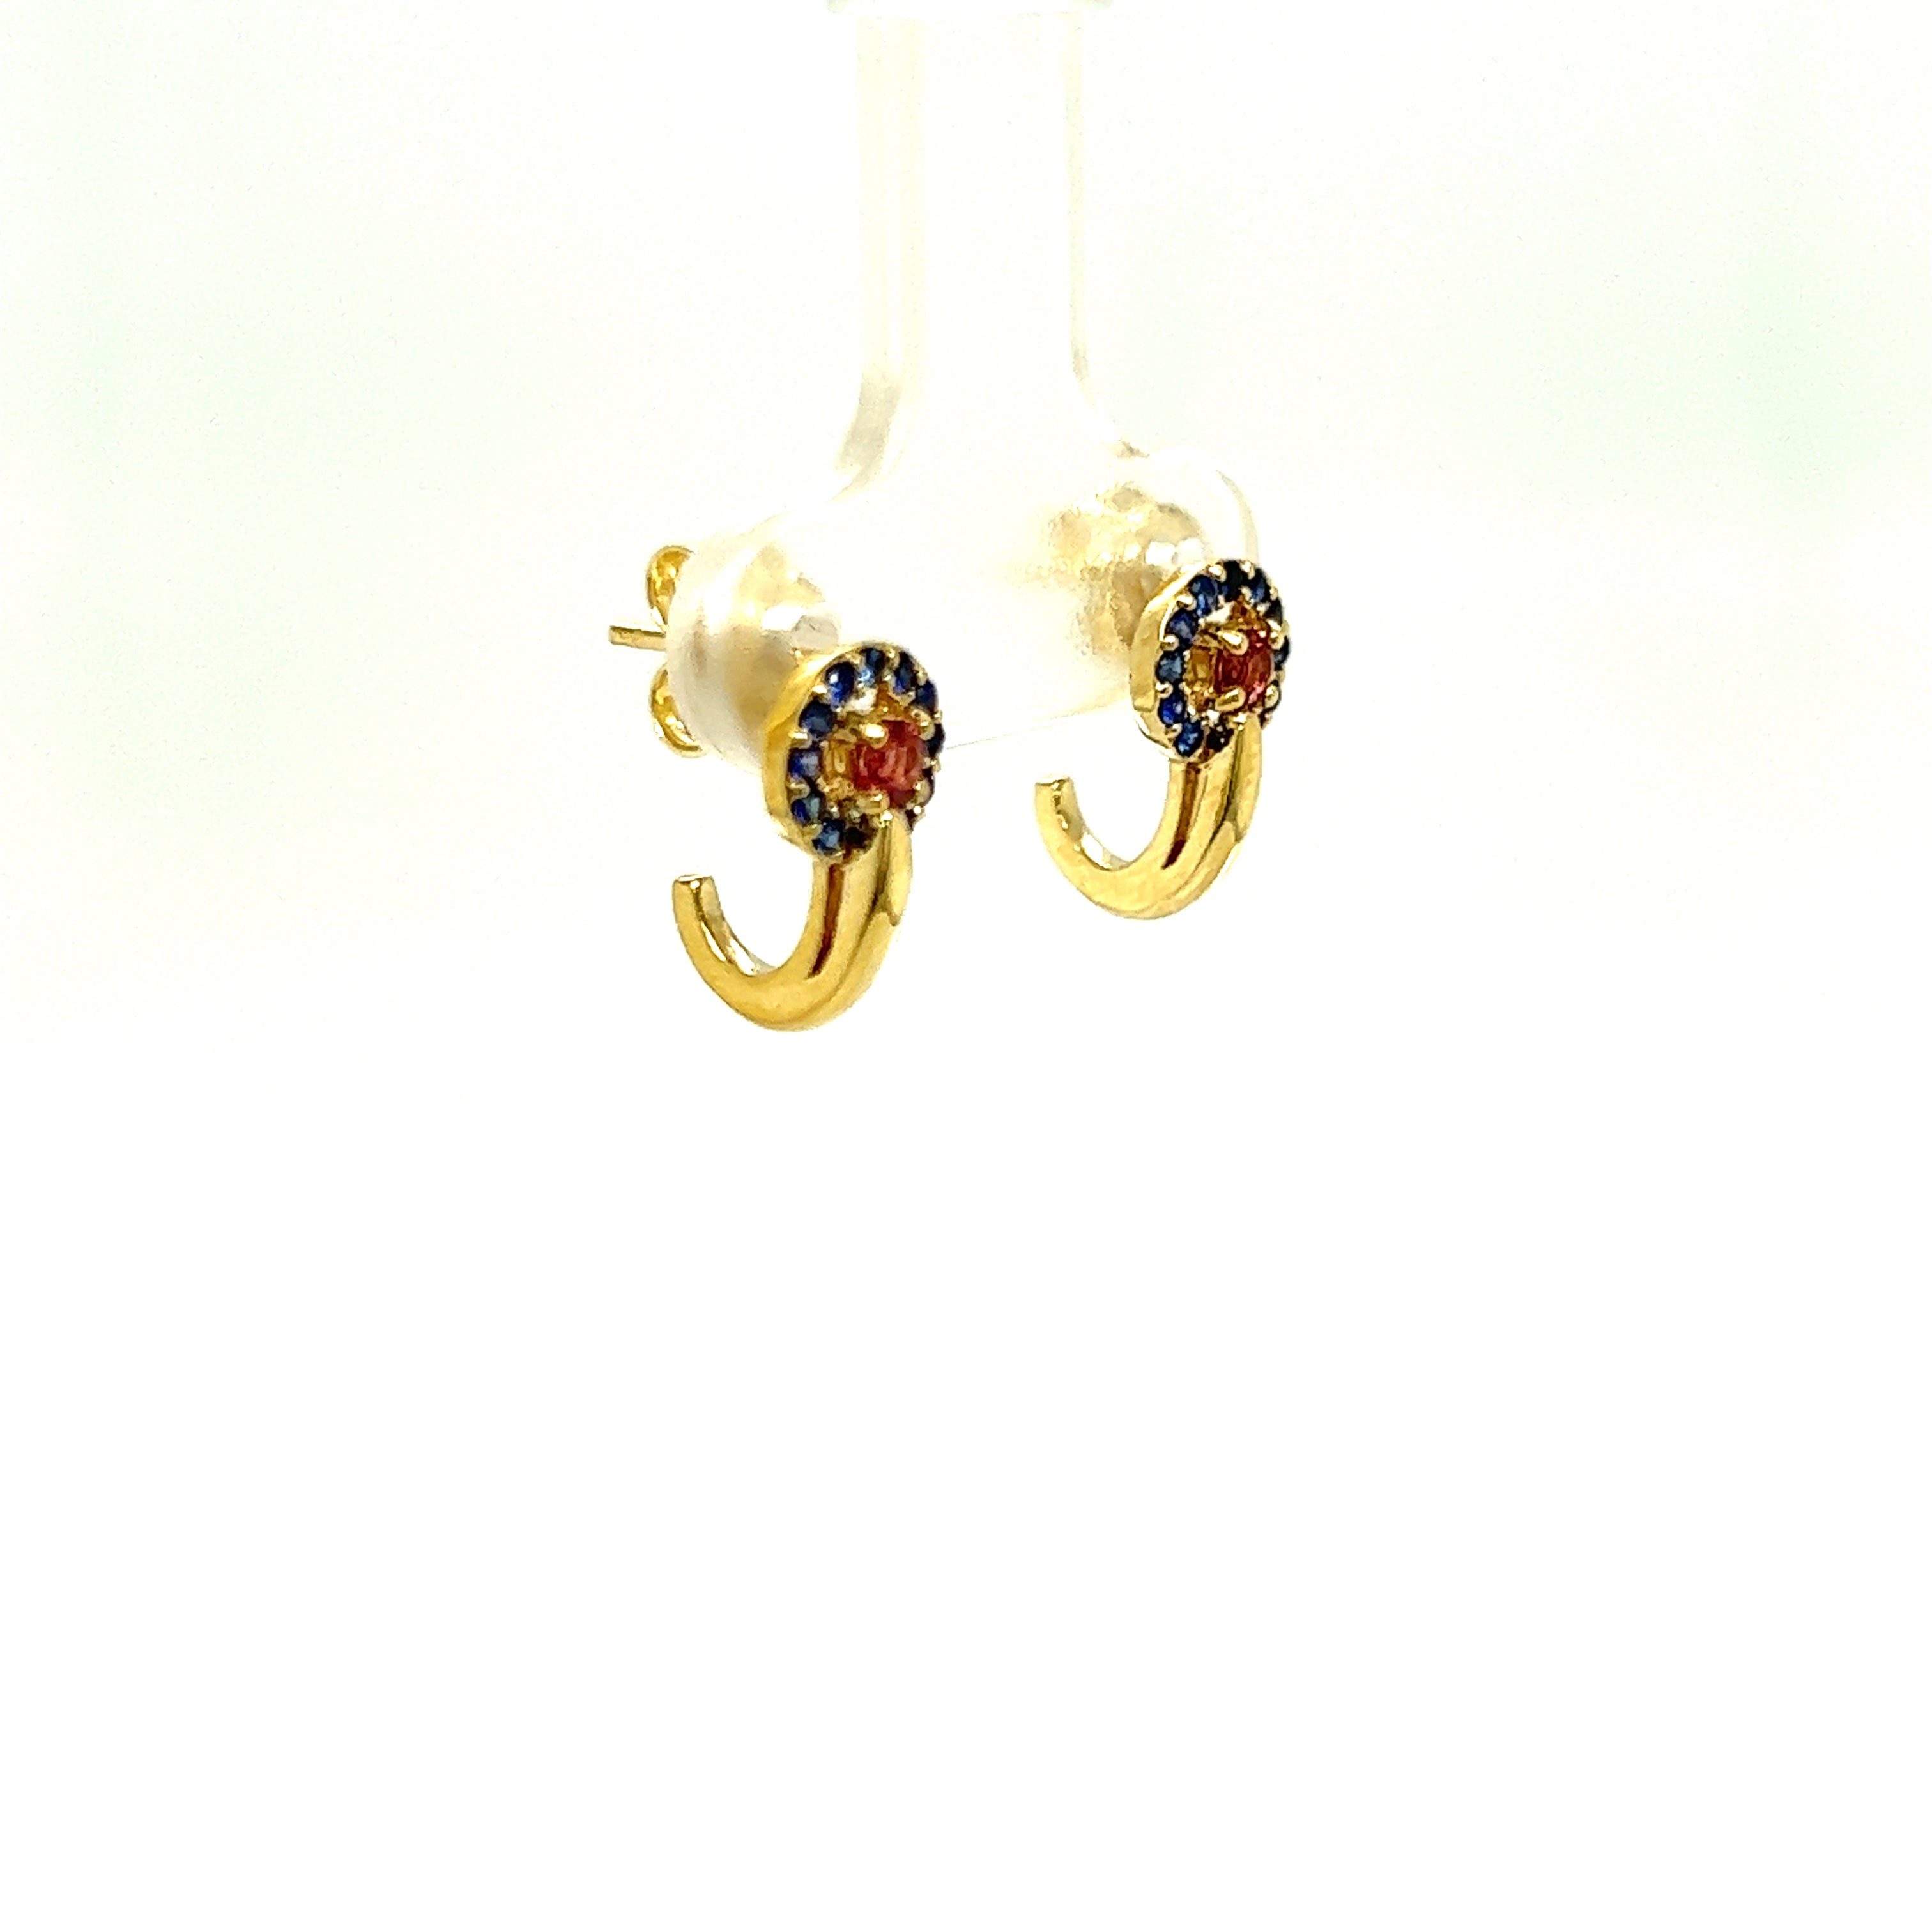 9ct Yellow Gold Pink Tourmaline and Sapphire Earrings.